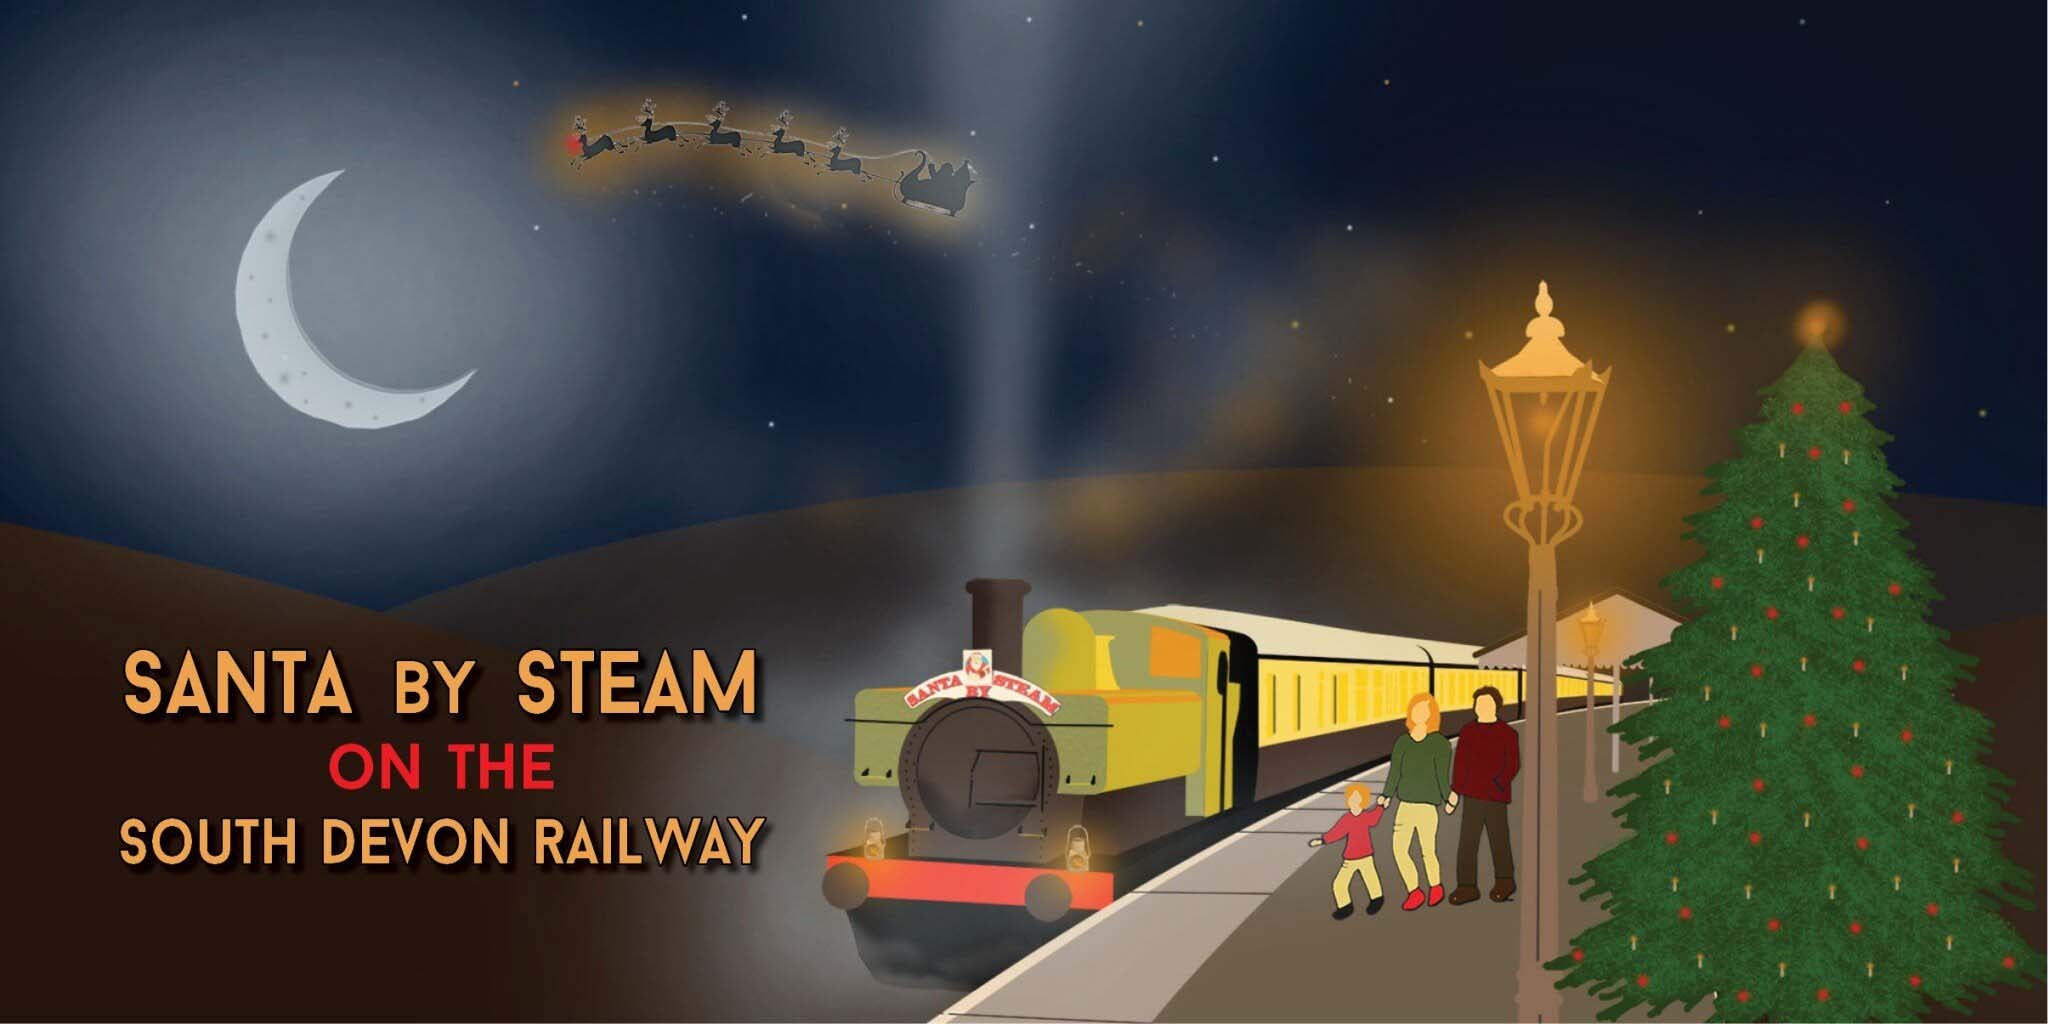 Steam trains and Santa specials with Kingfisher Giftwear